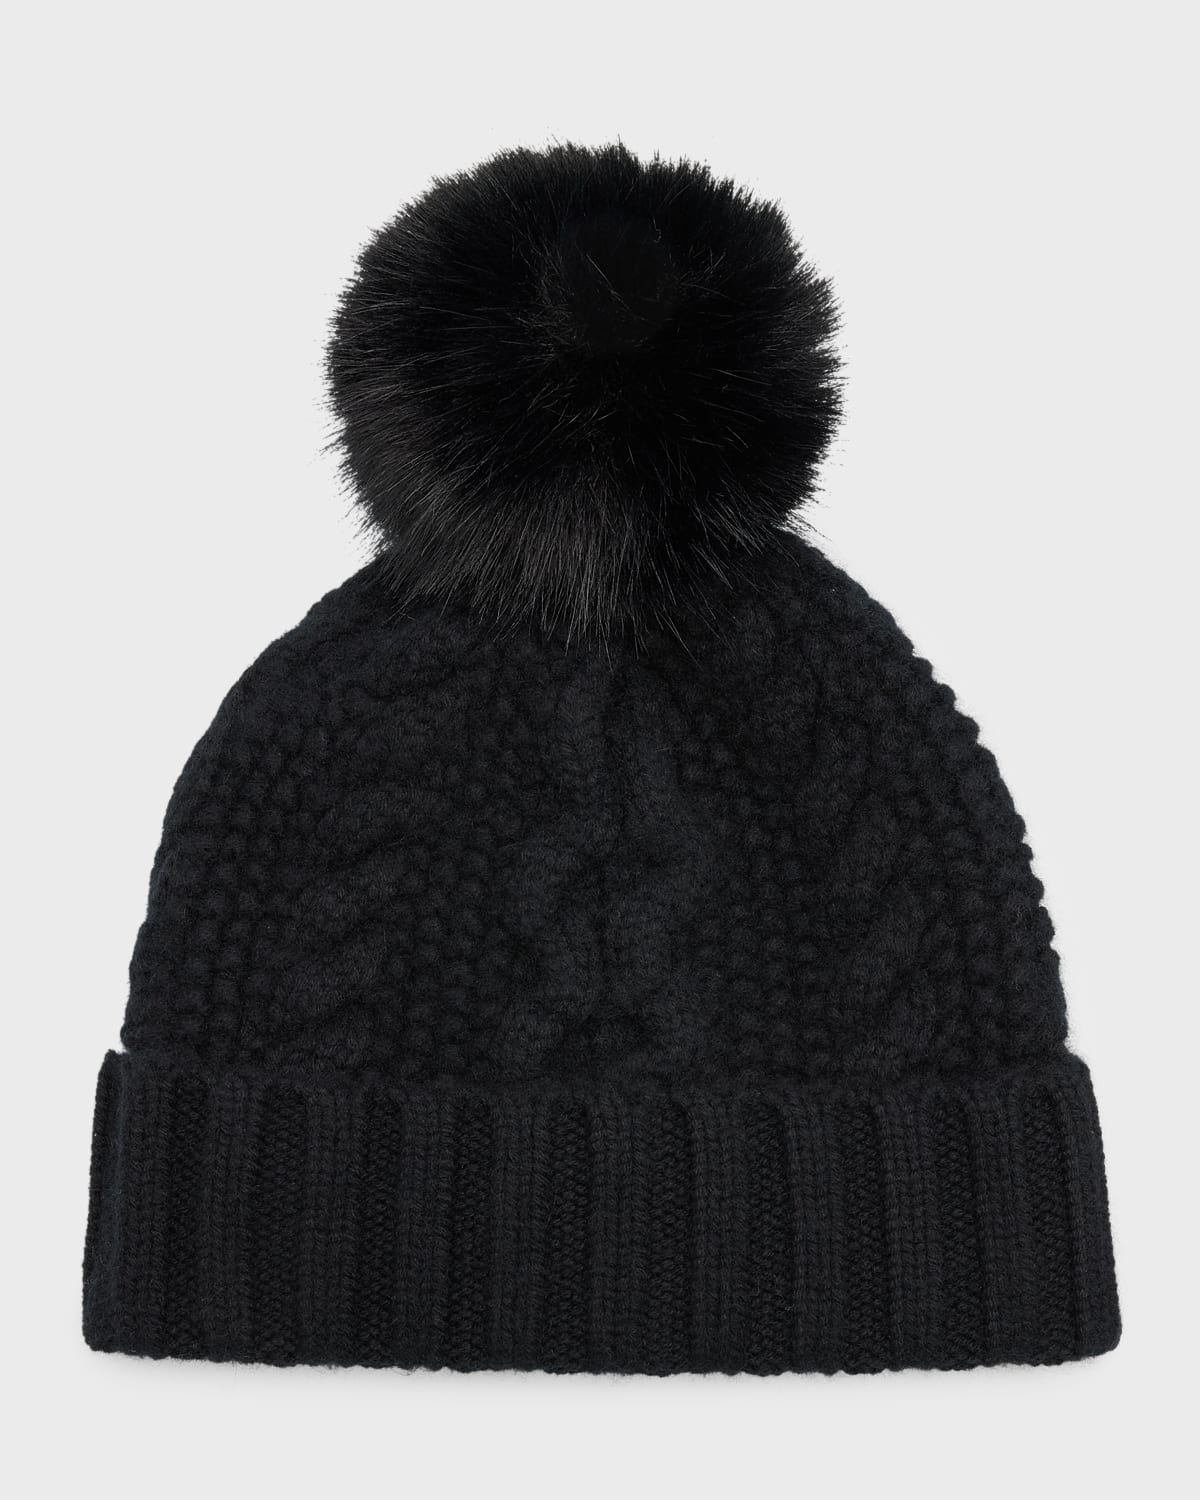 Chunky Cable Knit Cashmere Beanie With Faux Pom